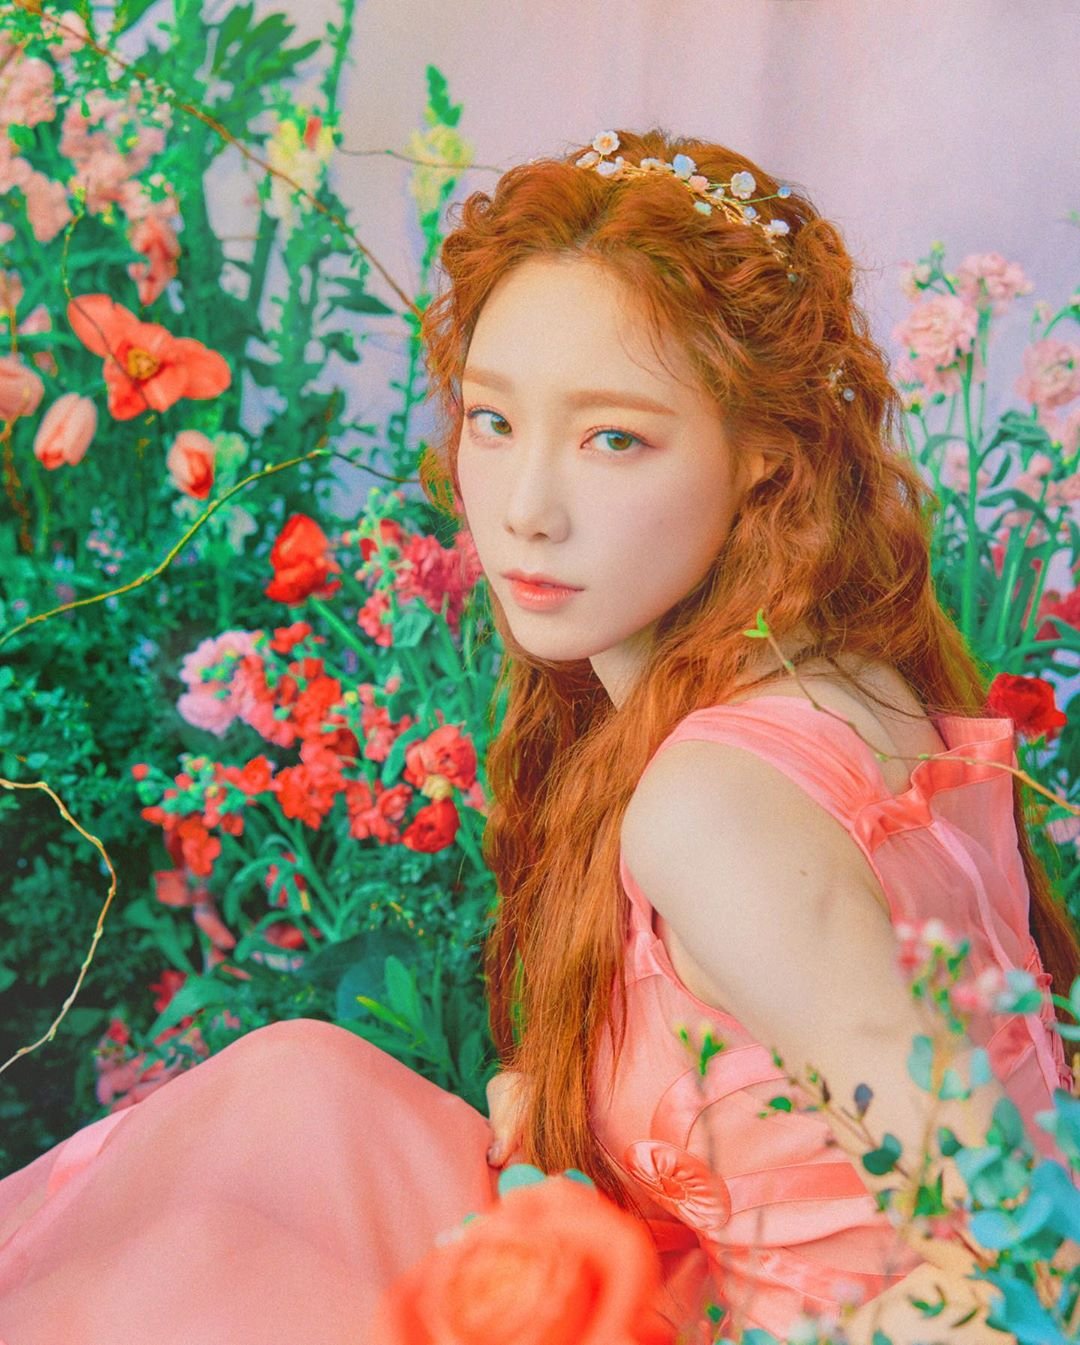 Kit Video of TAEYEON's 4th Solo Concert 'The UNSEEN' will be Released on June 23rd